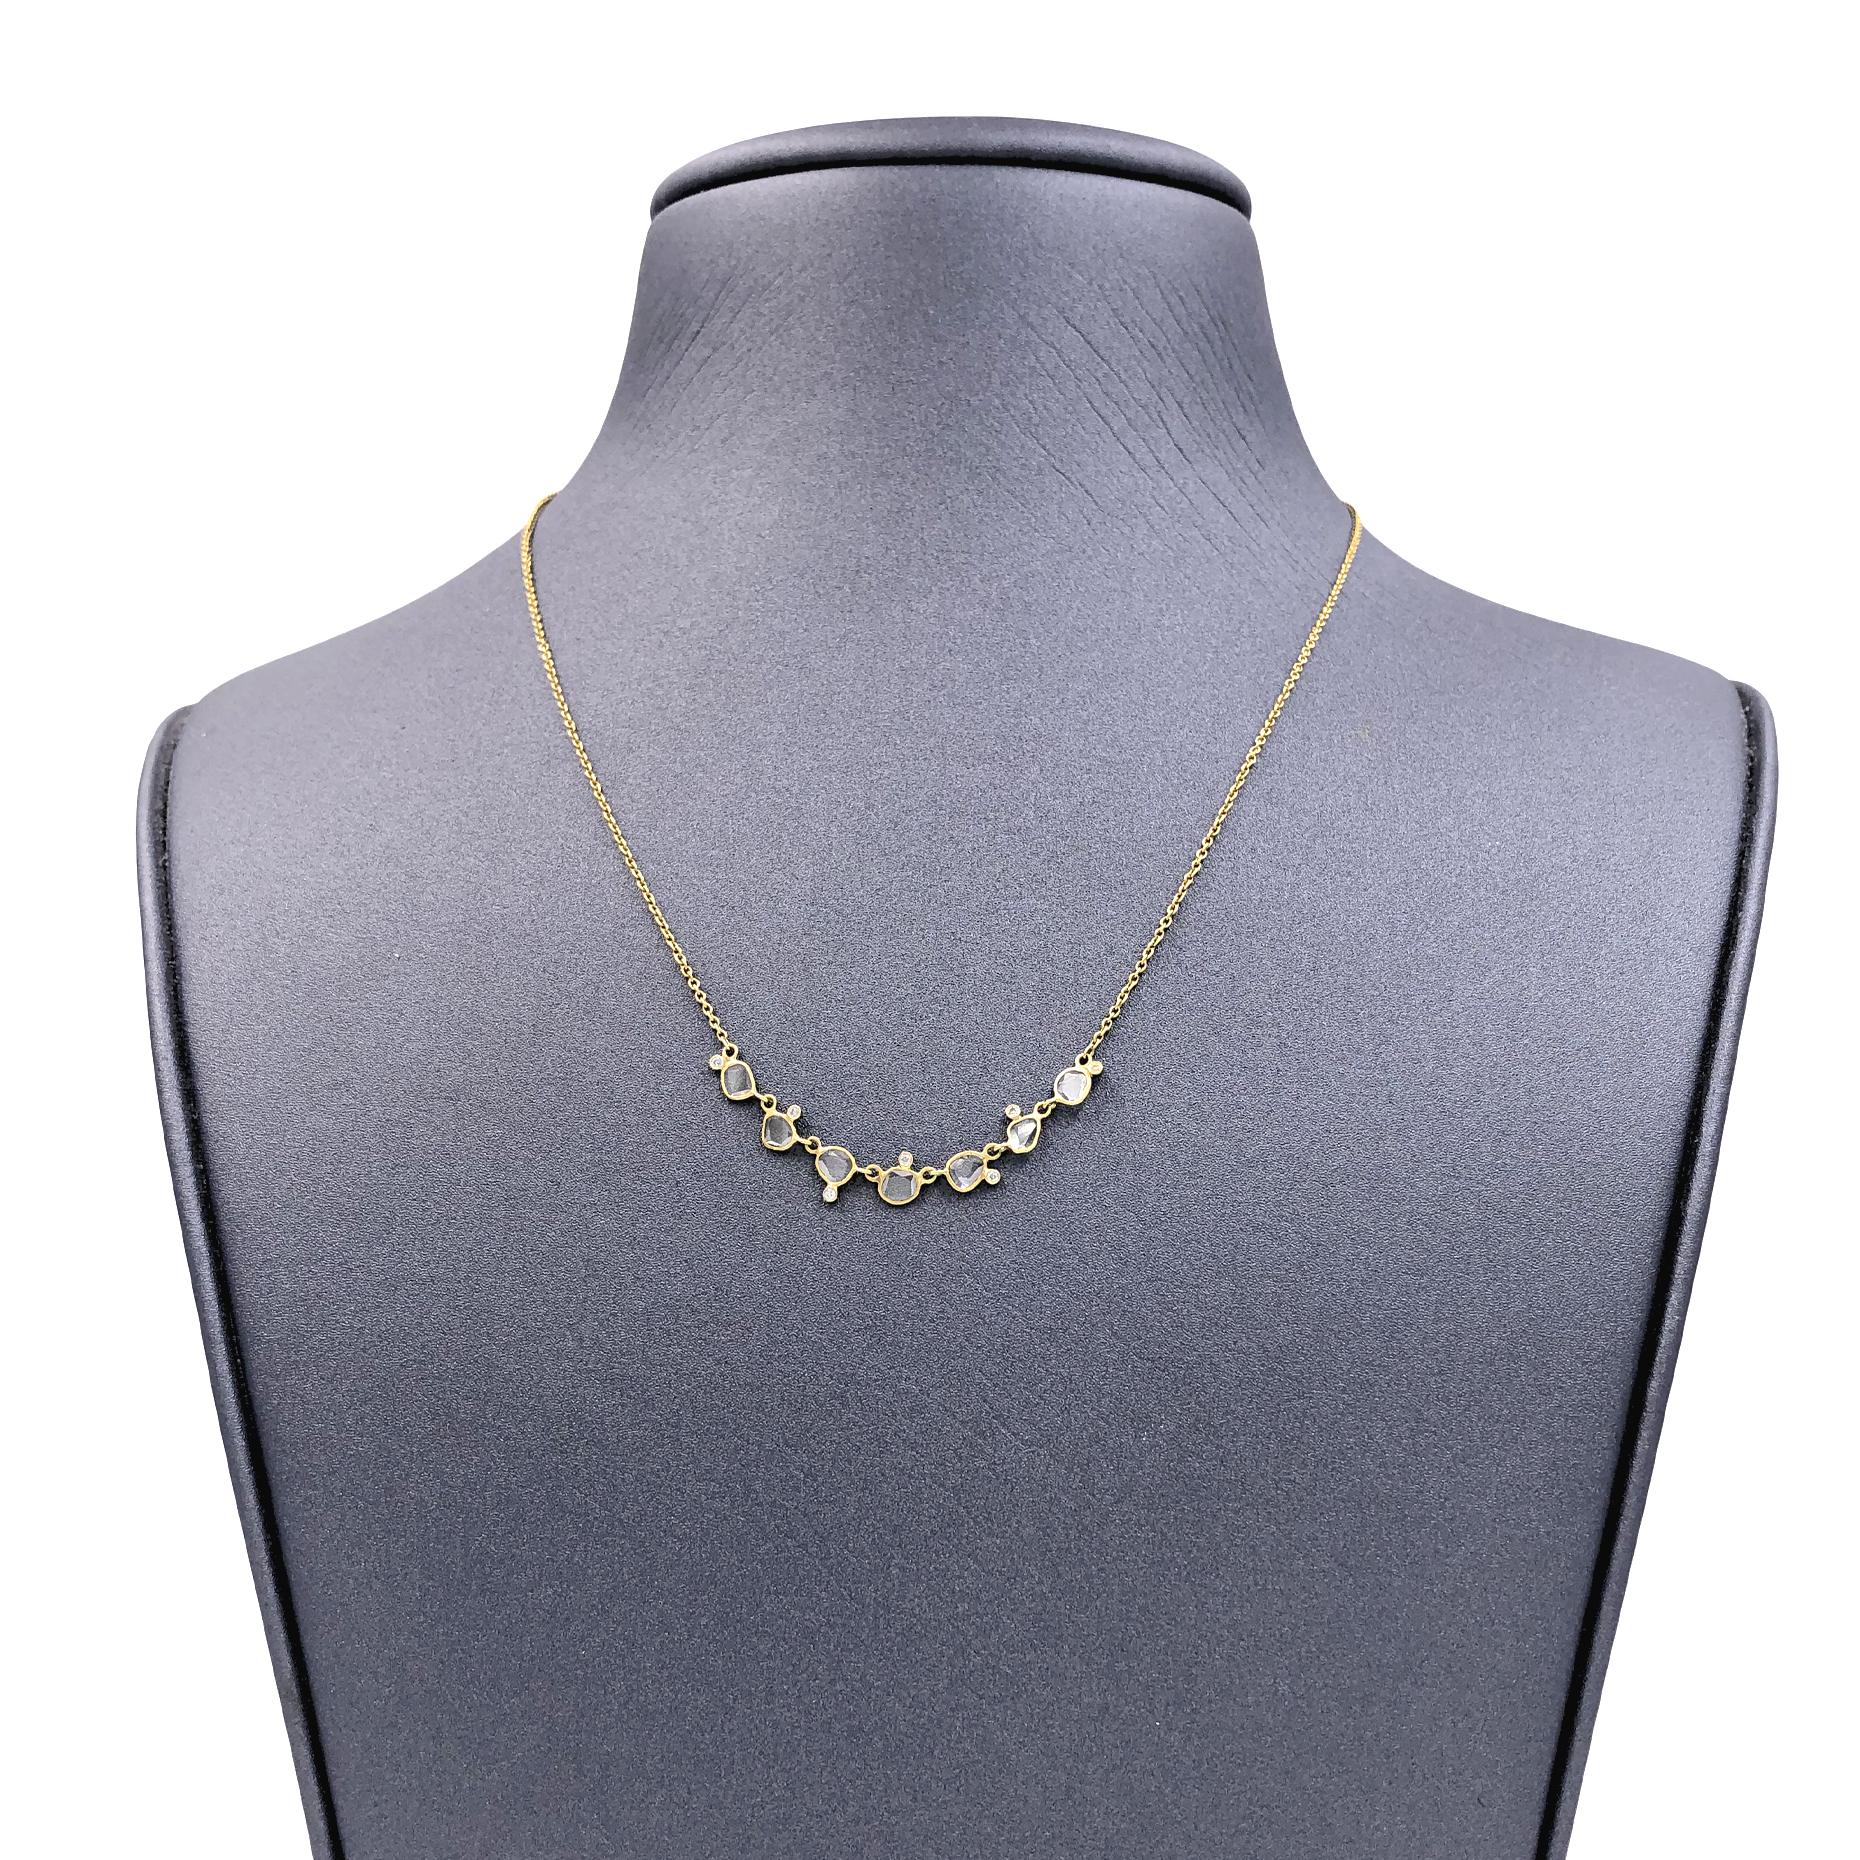 Curved Diamond Bar Necklace handcrafted by jewelry maker Tej Kothari in matte-finished 18k yellow gold featuring seven shimmering polki diamonds totaling 0.32 carats accented with 0.04 total carats of round brilliant-cut white diamonds. Worn at 16,